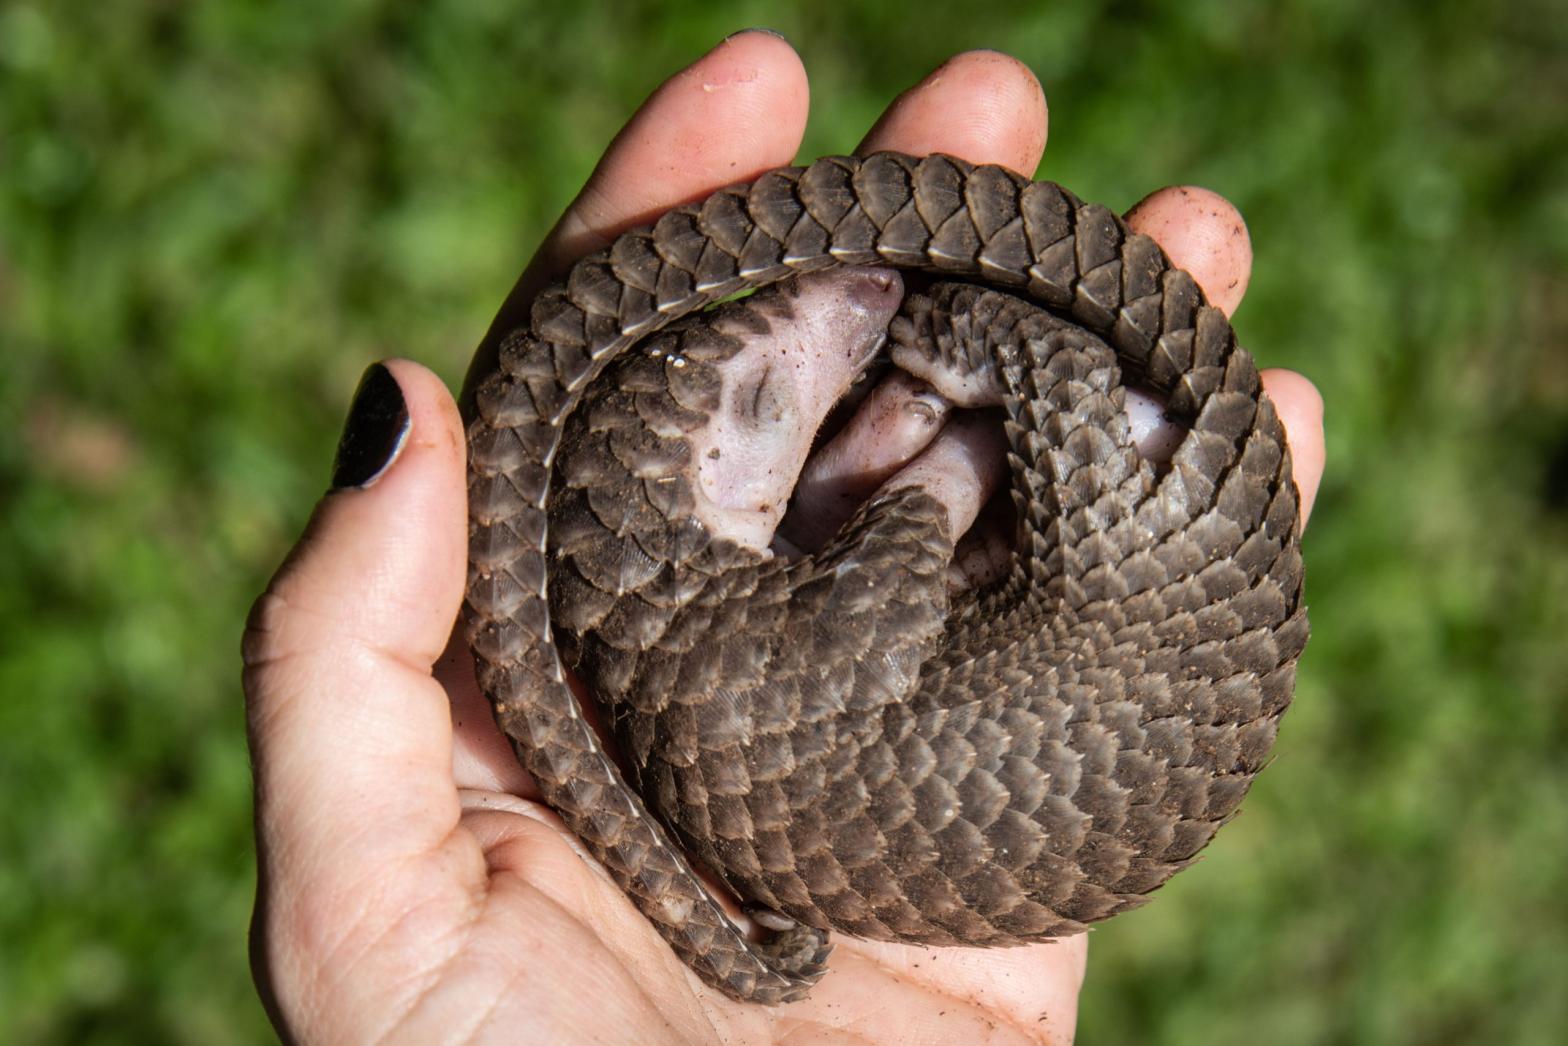 A white-bellied pangolin rescued in Uganda last year. (Photo: Photo by ISAAC KASAMANI/AFP via Getty Images, Getty Images)